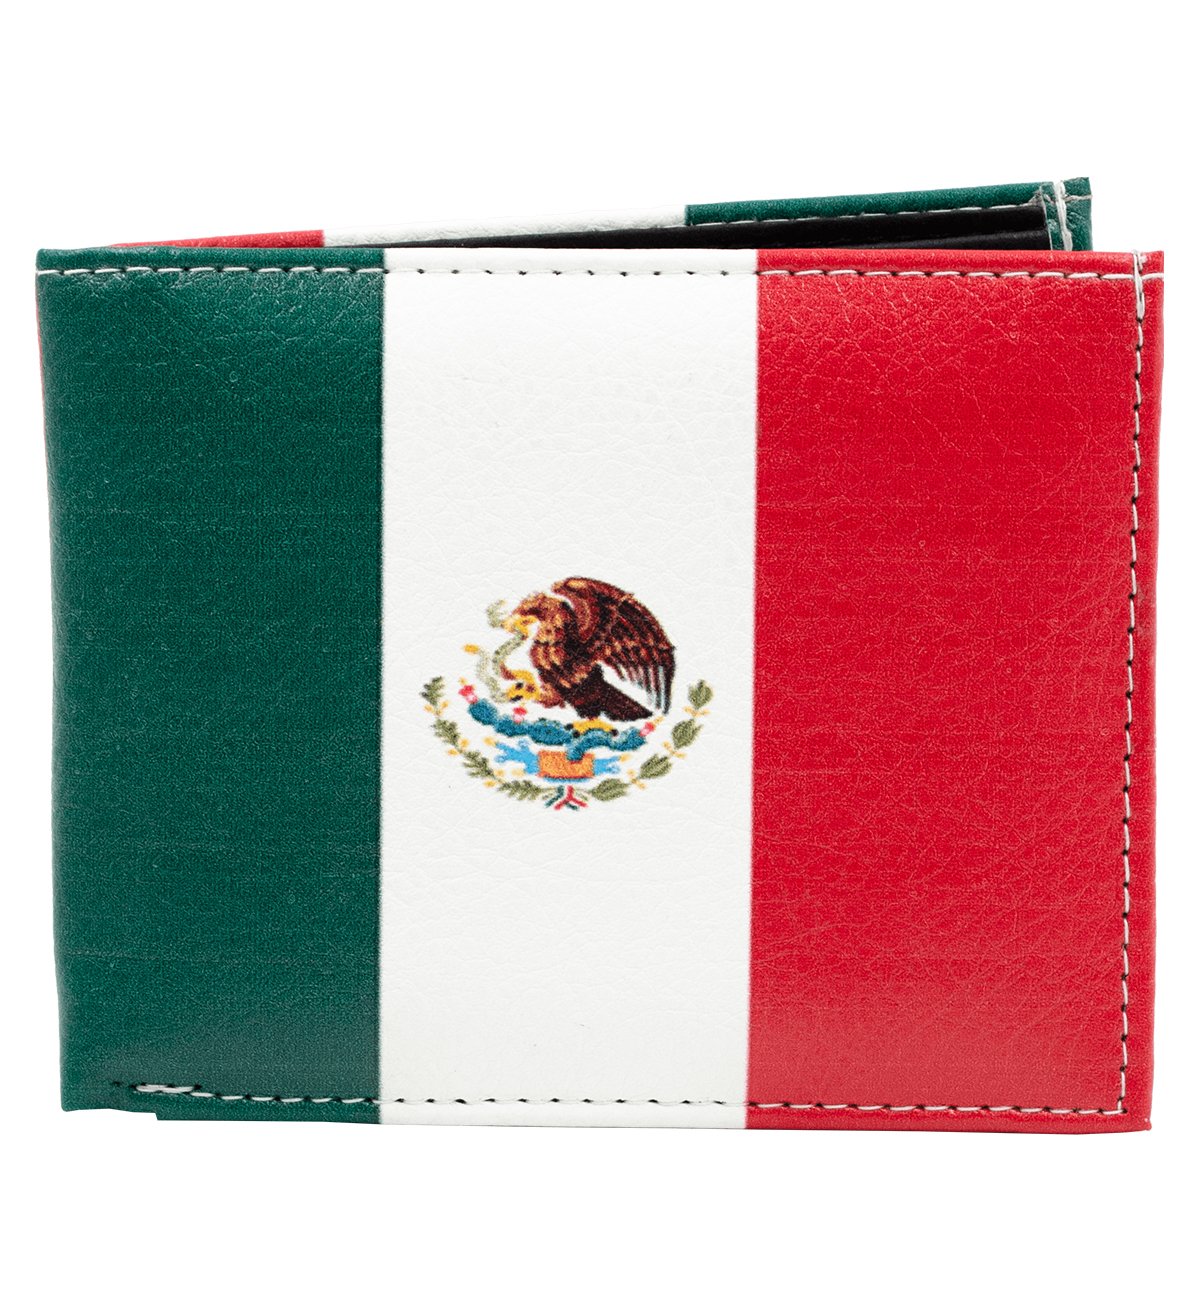 Mexican Flag Bifold Printed Wallet Vegan Leather – #WL-MXC FLG